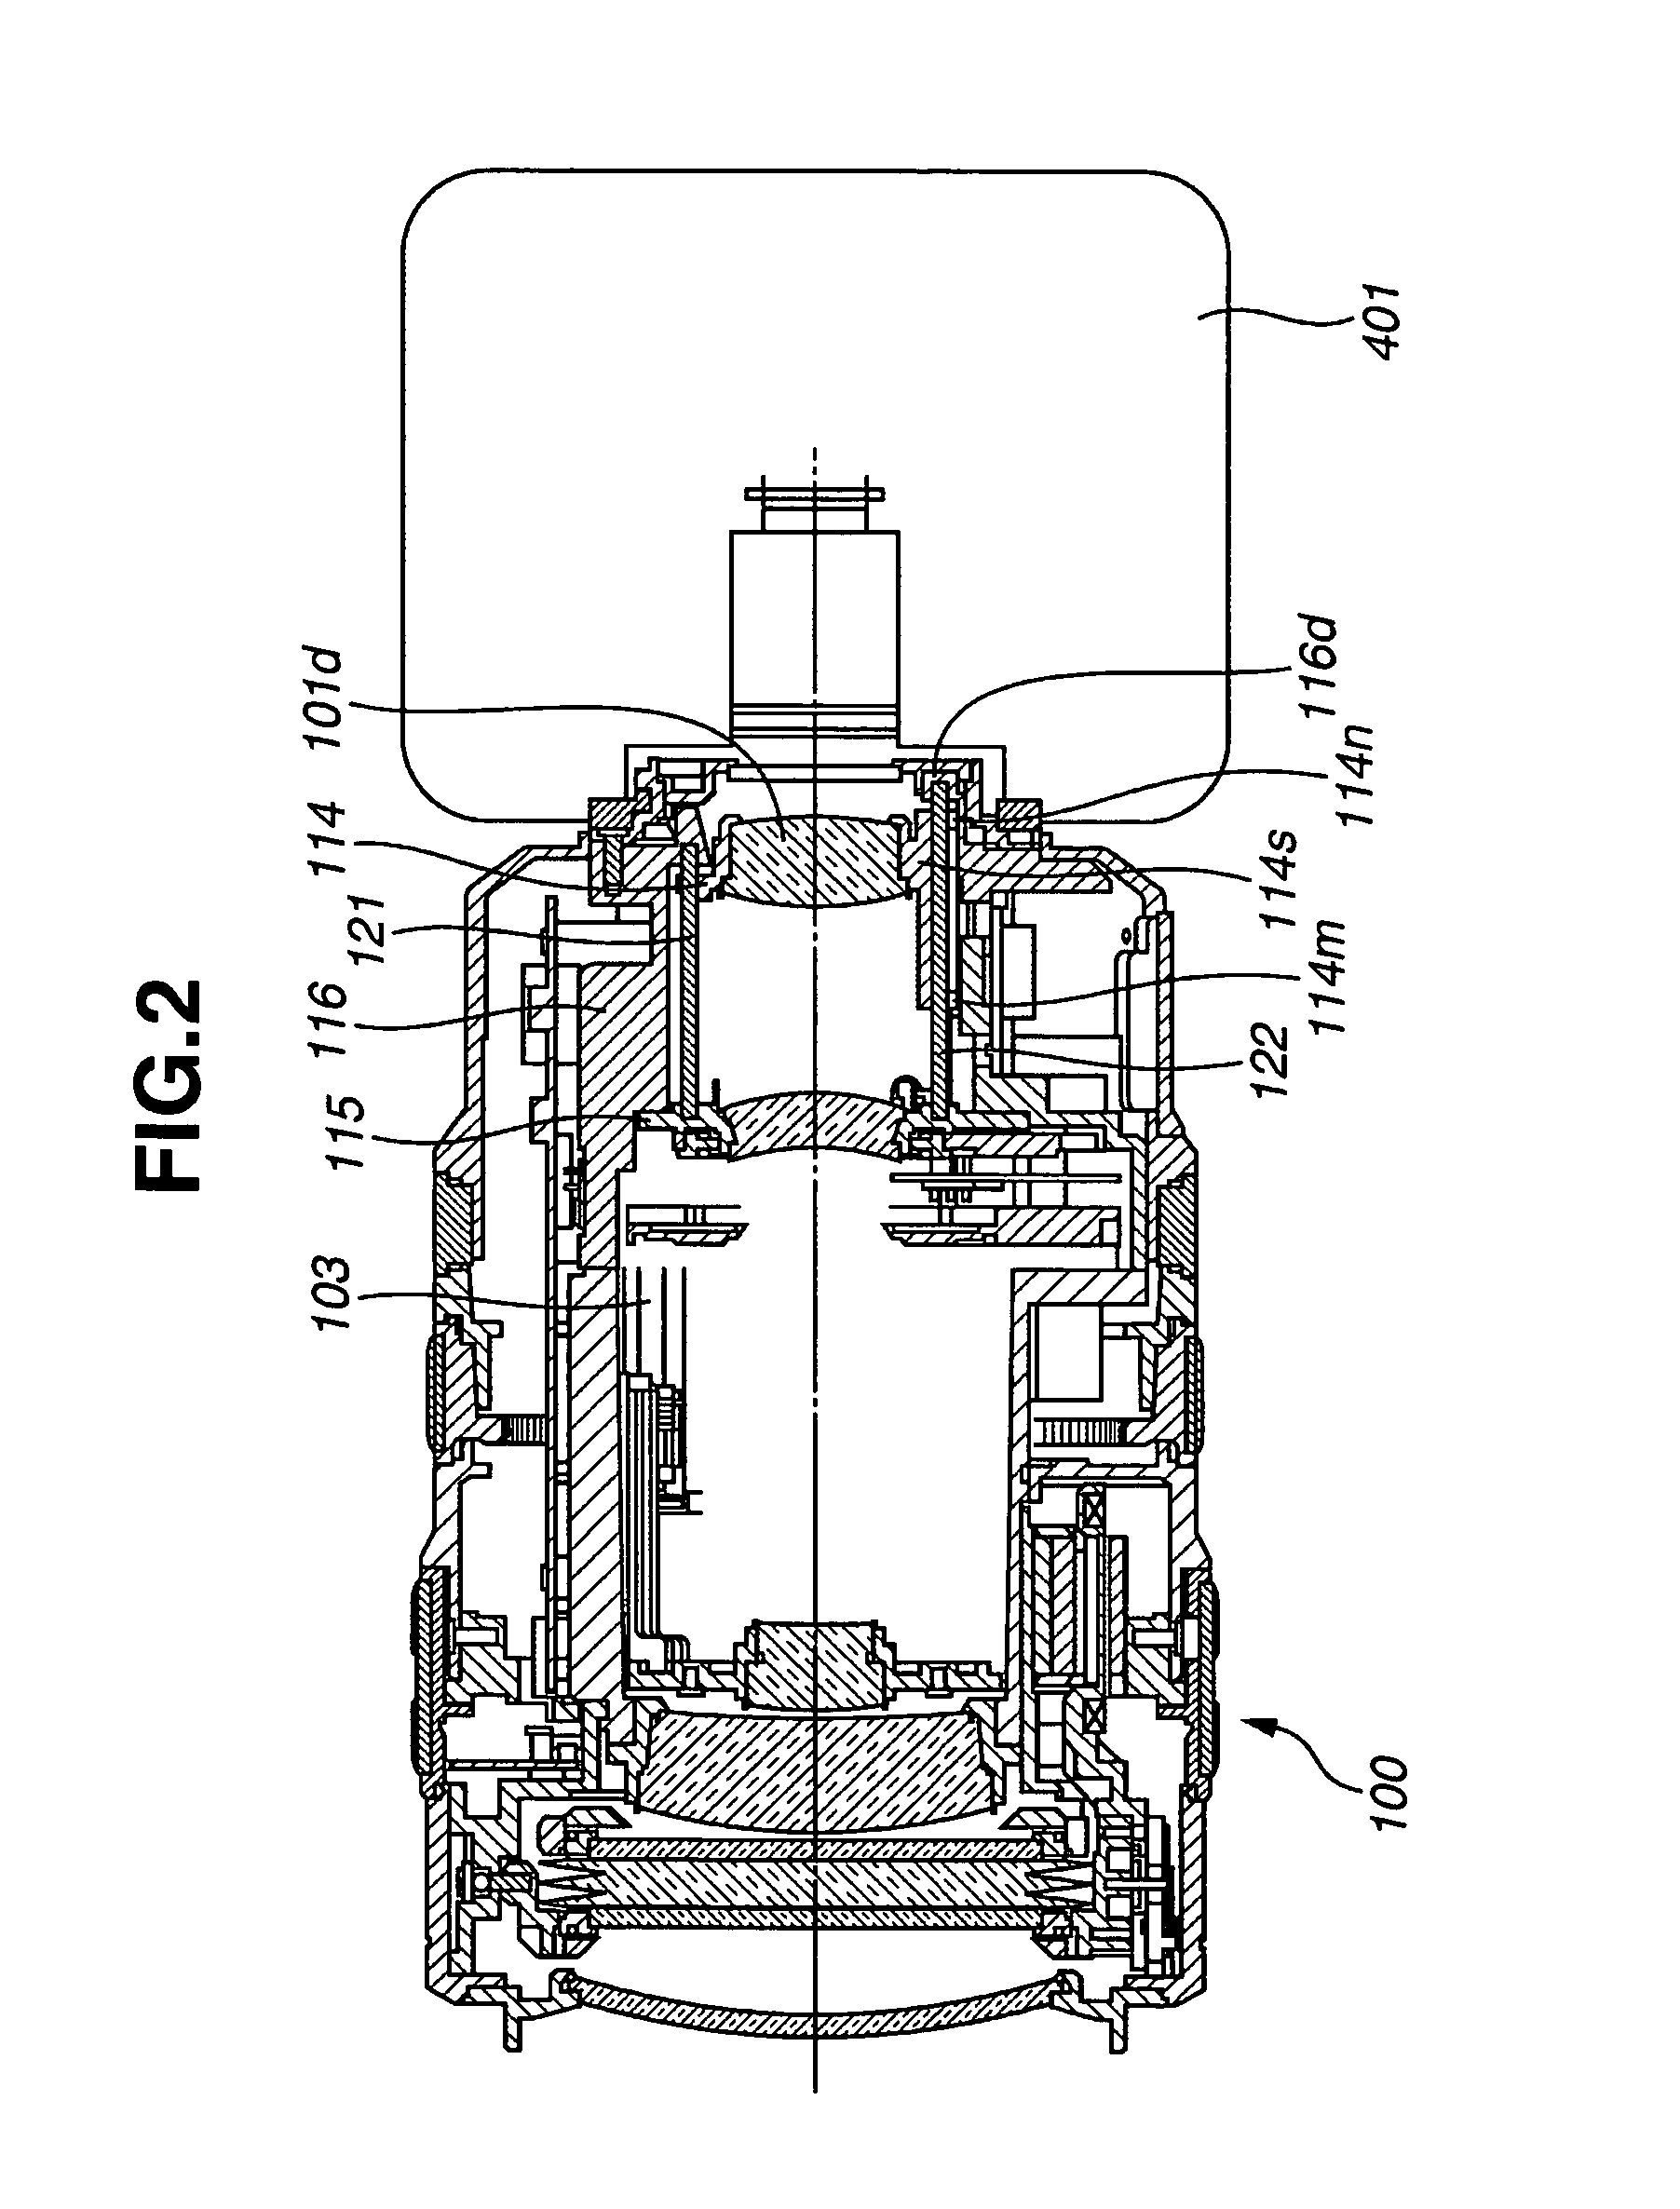 Lens barrel and photographing apparatus incorporating the same